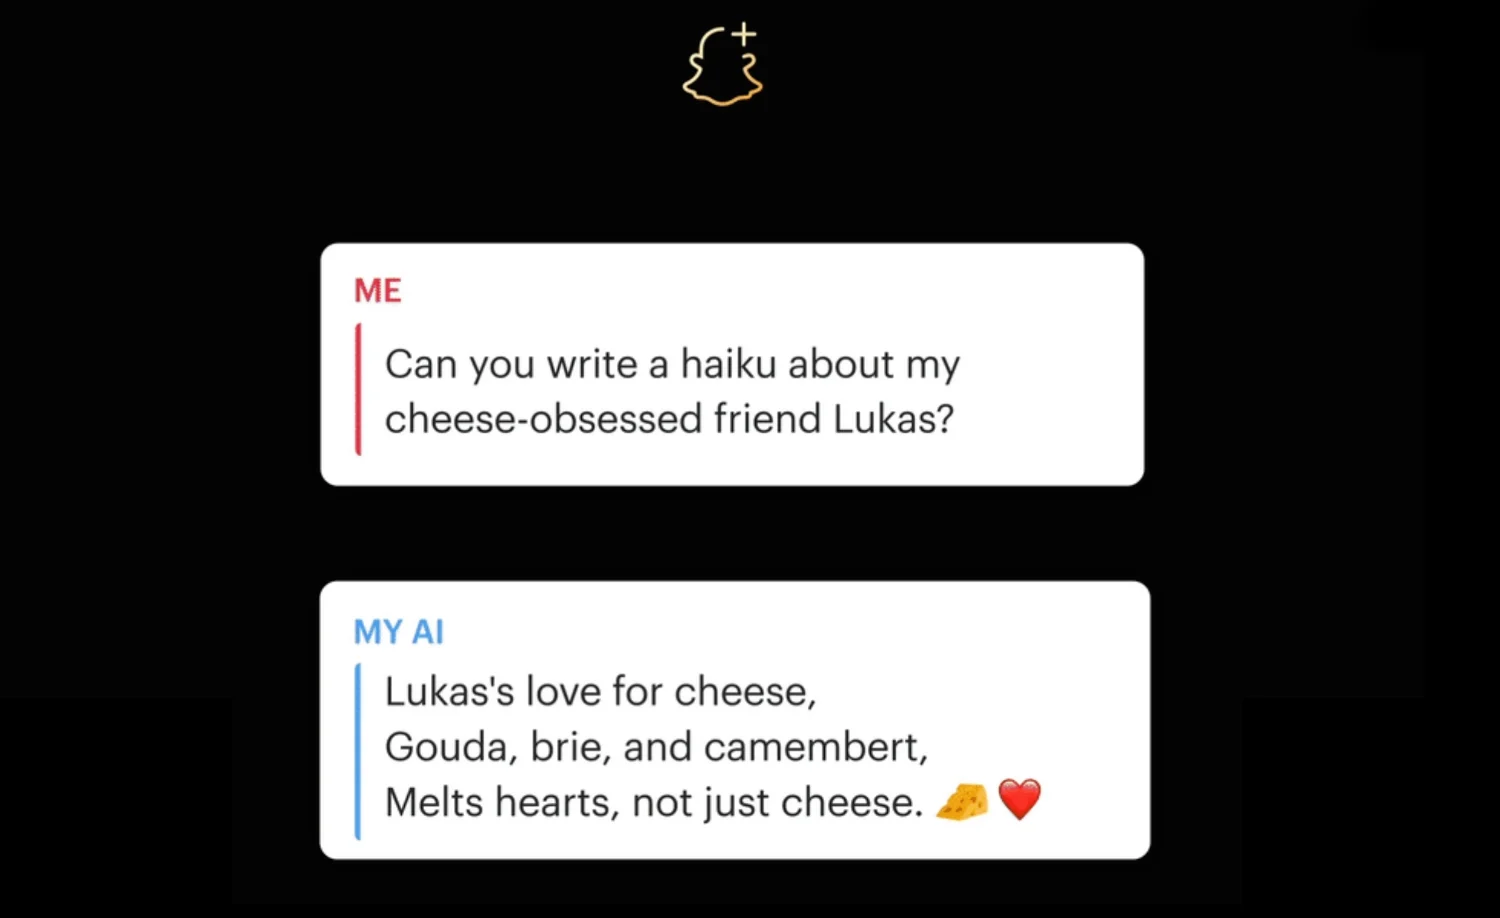 Black screen with the Snapchat+ logo at the top. In the middle are two white chat boxes. The first bubble asks AI to write a haiku about a friend named Lukas; the second bubble is My AI’s response with a short haiku about his love of cheese.